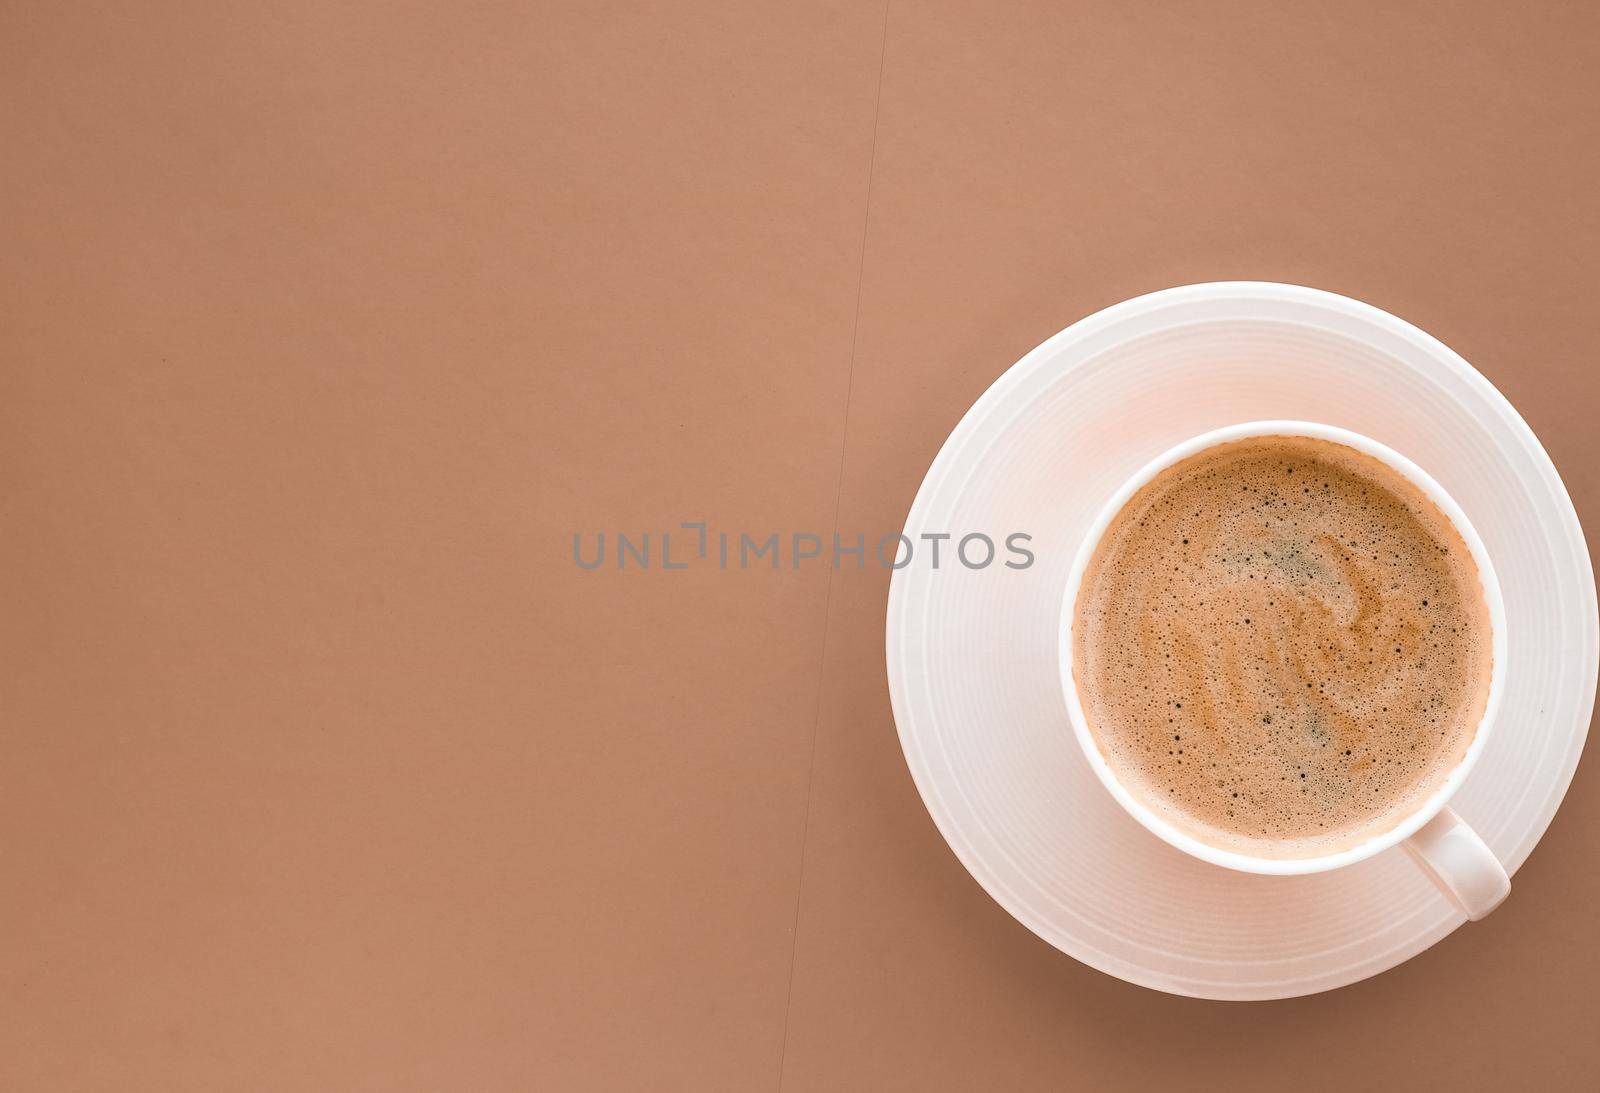 Drinks menu, italian espresso recipe and organic shop concept - Cup of hot coffee as breakfast drink, flatlay cups on beige background